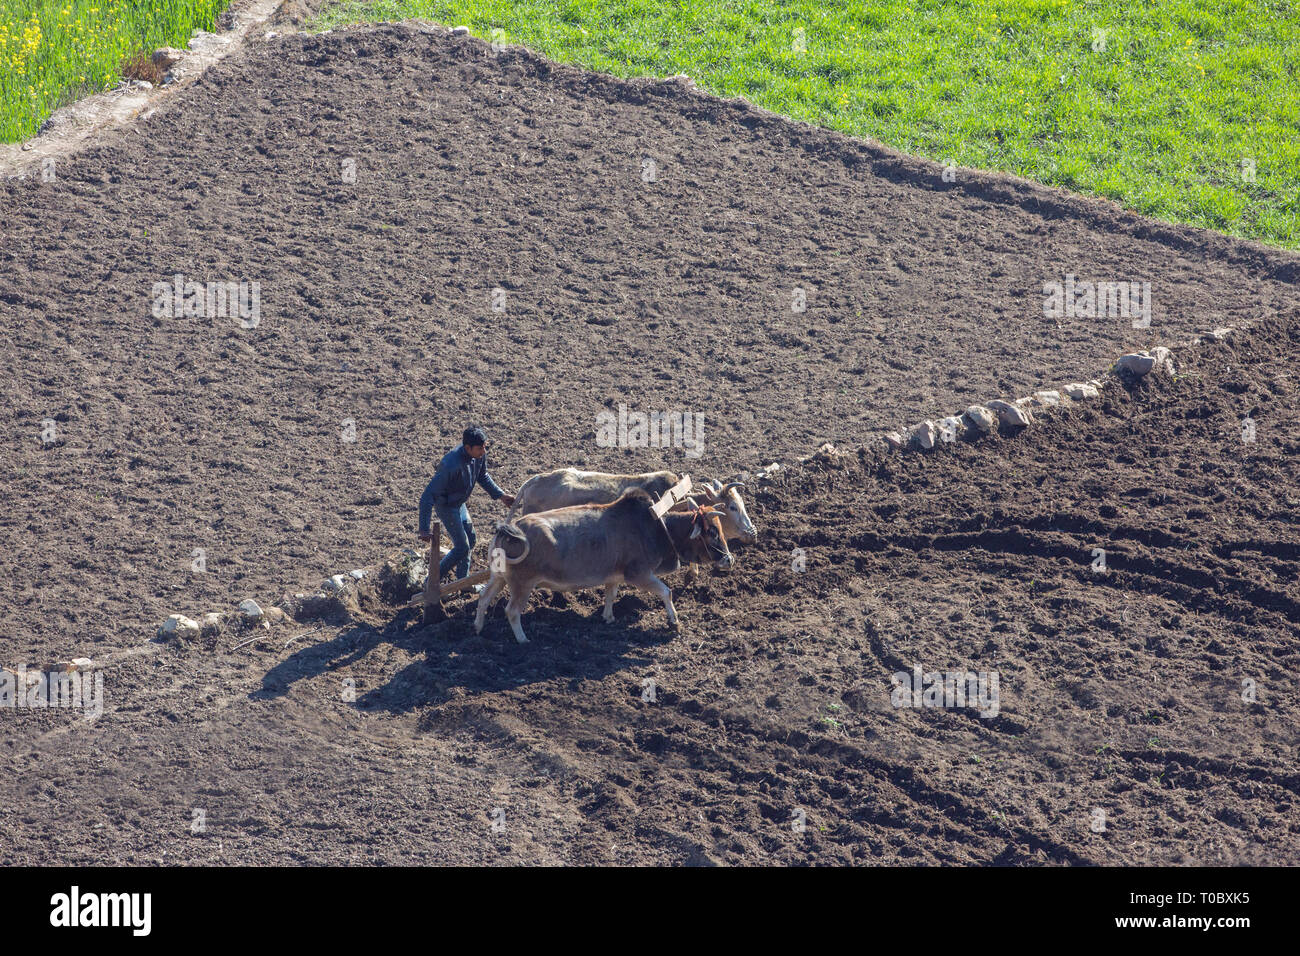 Farmer, using Zebu Oxen, to plow and prepare a paddy field for resowing a new crop of rice. Northern India. January, February. Stock Photo